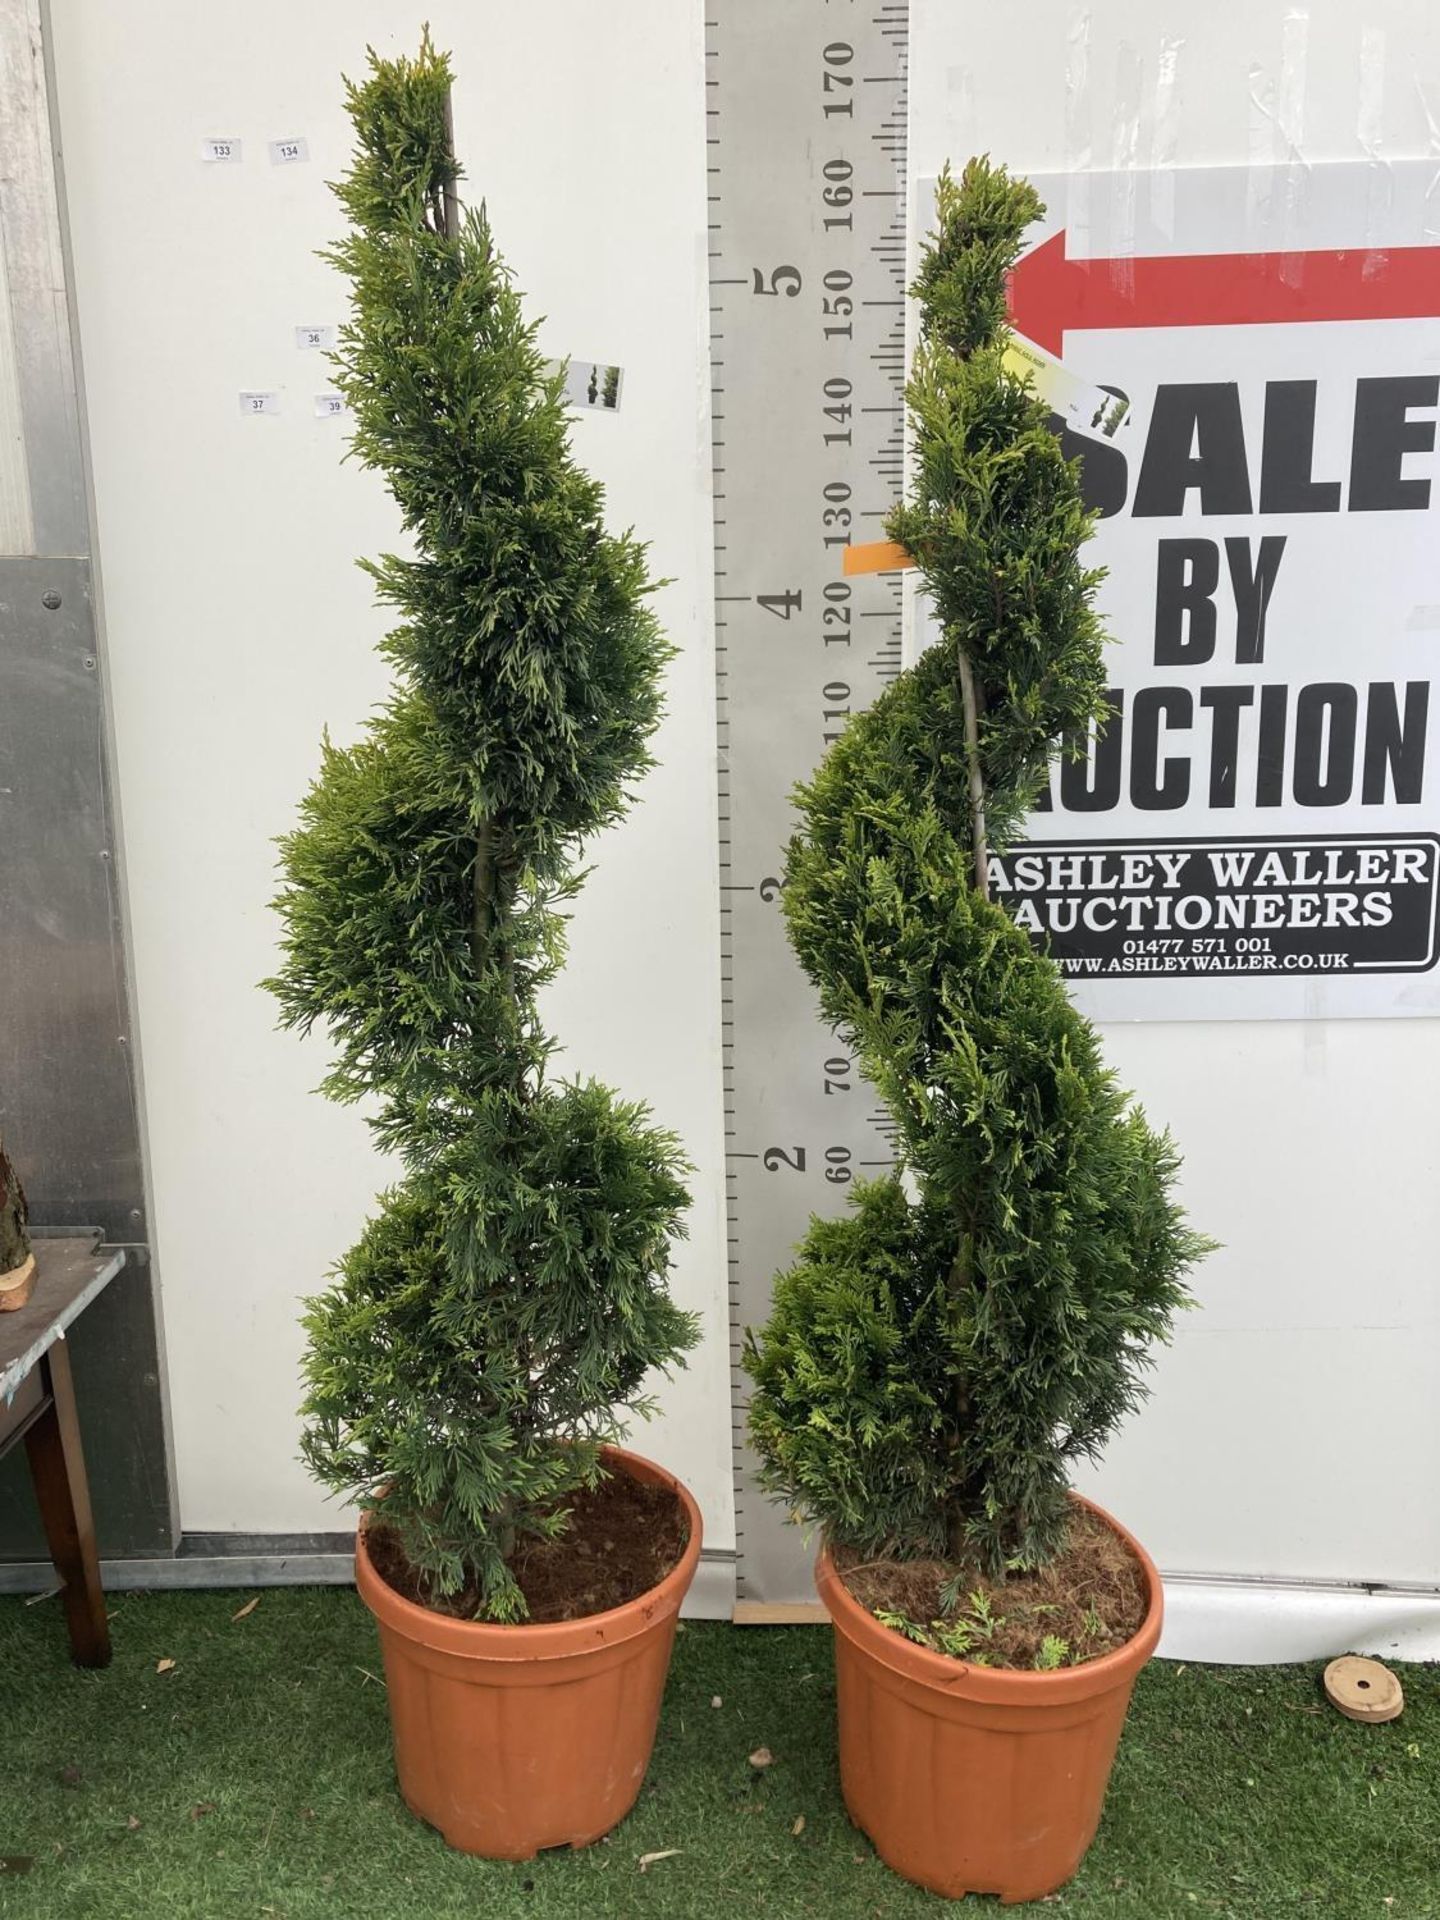 TWO SPIRAL CUPRESSOCYPARIS LEYLANDII 'GOLD RIDER' OVER 150CM IN HEIGHT IN 15LTR POTS TO BE SOLD - Image 2 of 5